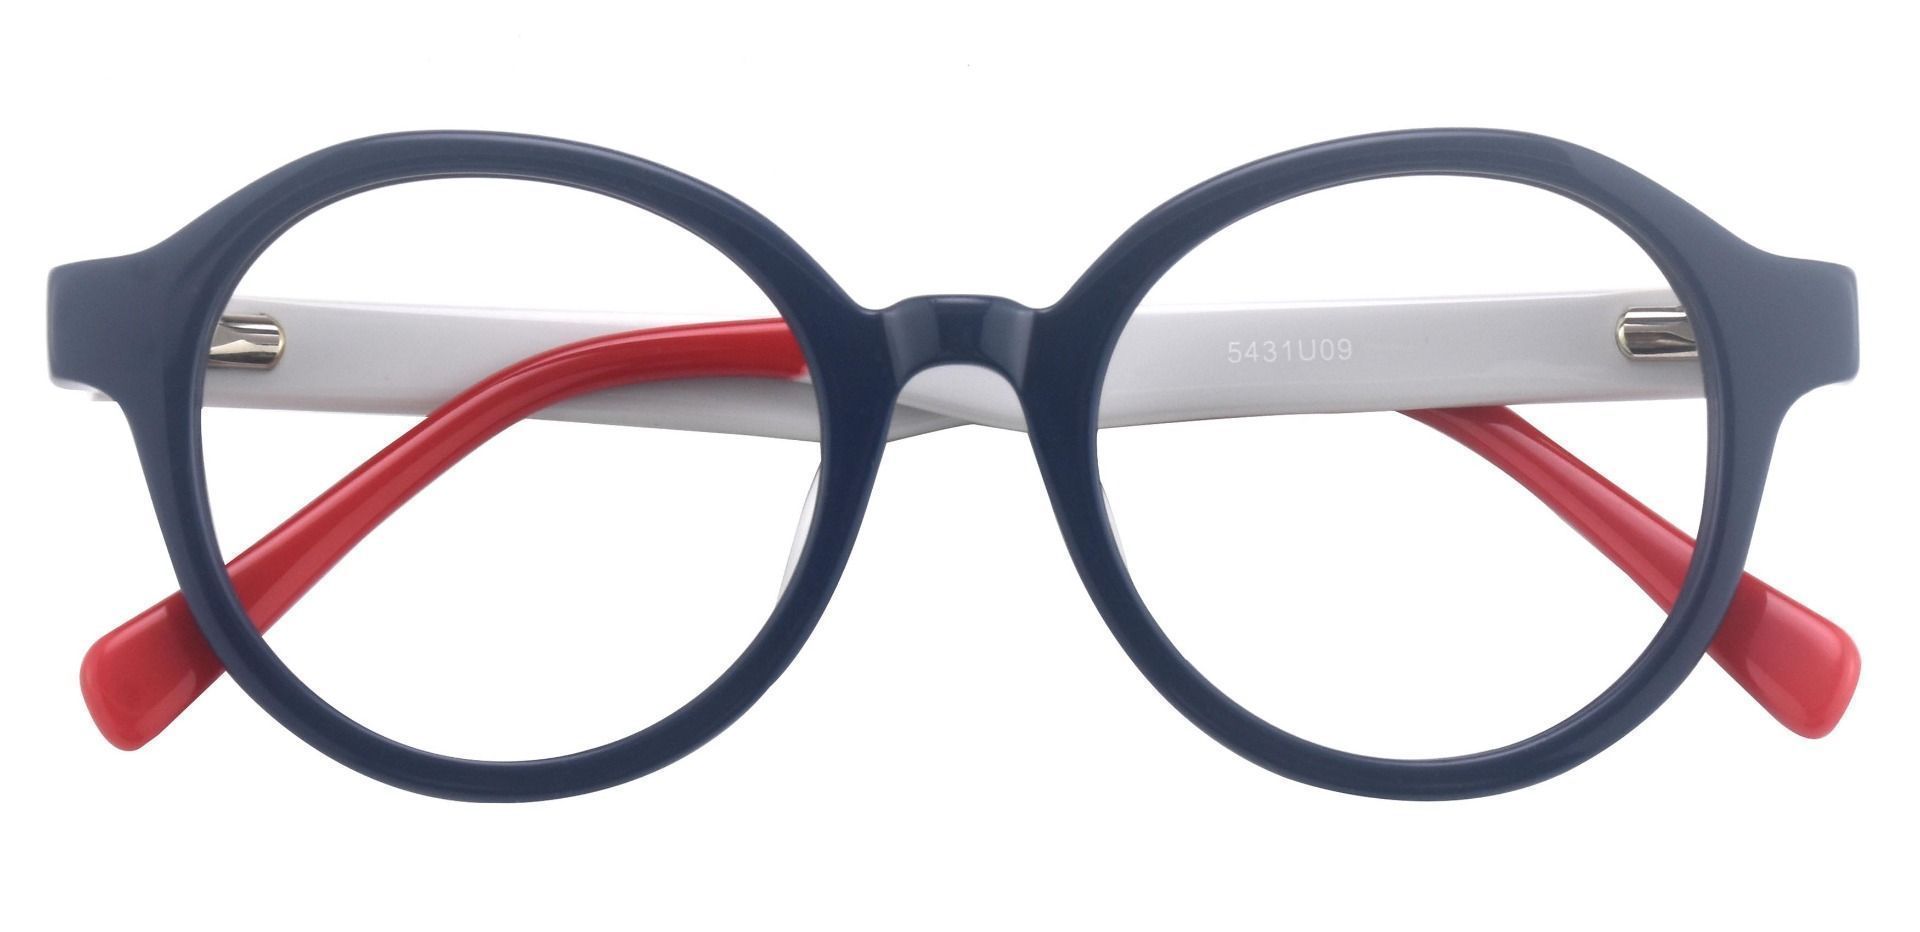 Roxbury Round Blue Light Blocking Glasses - The Frame Is Blue And Red